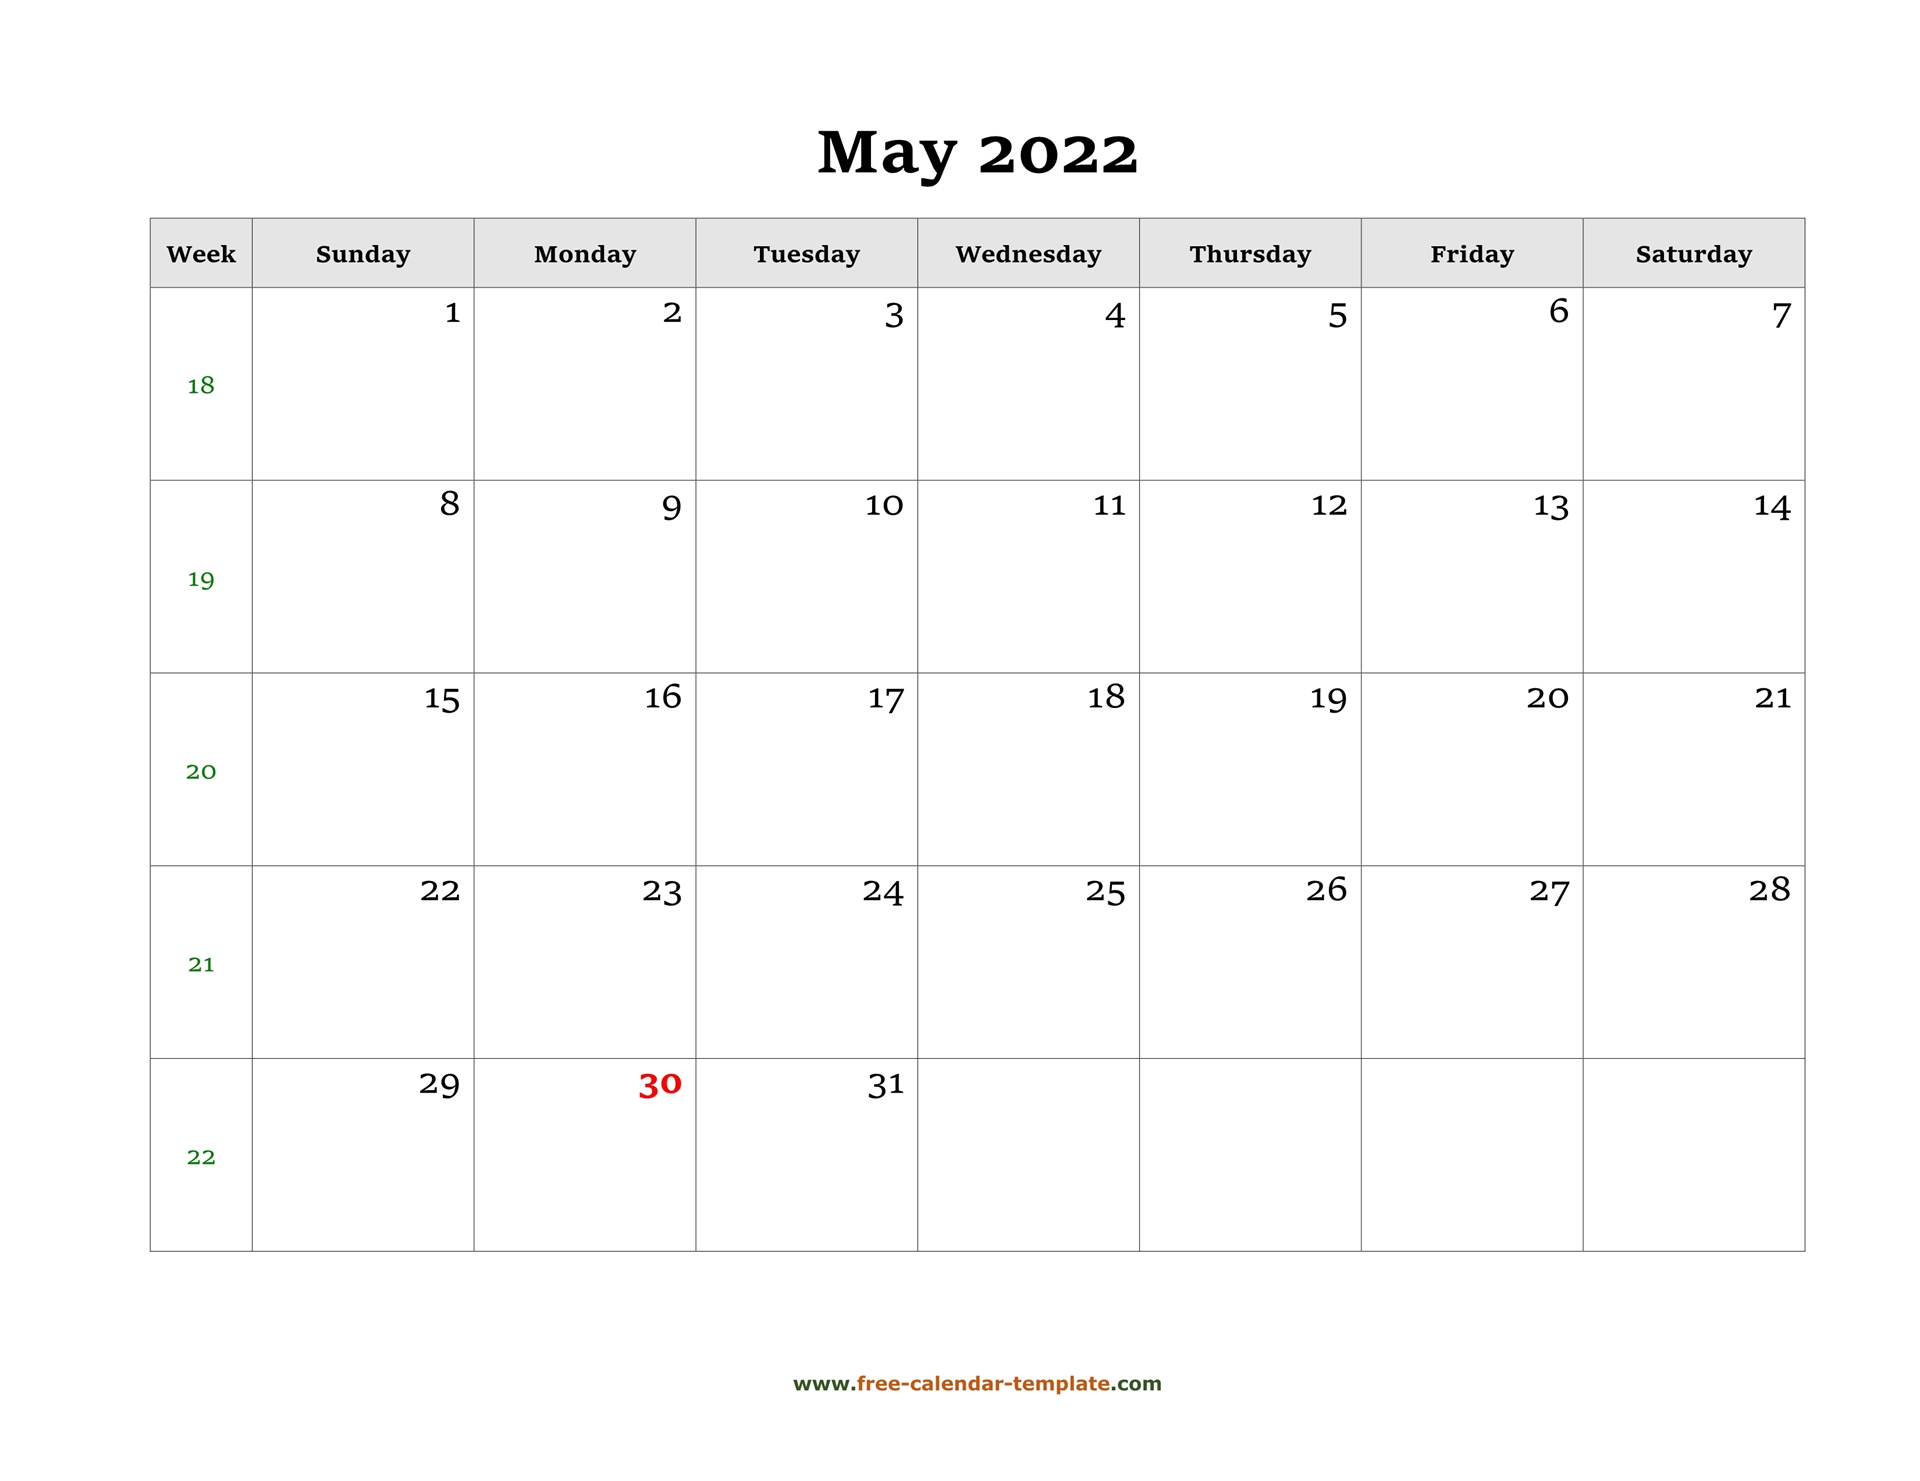 Pick May 2022 Calendar With Us Holidays